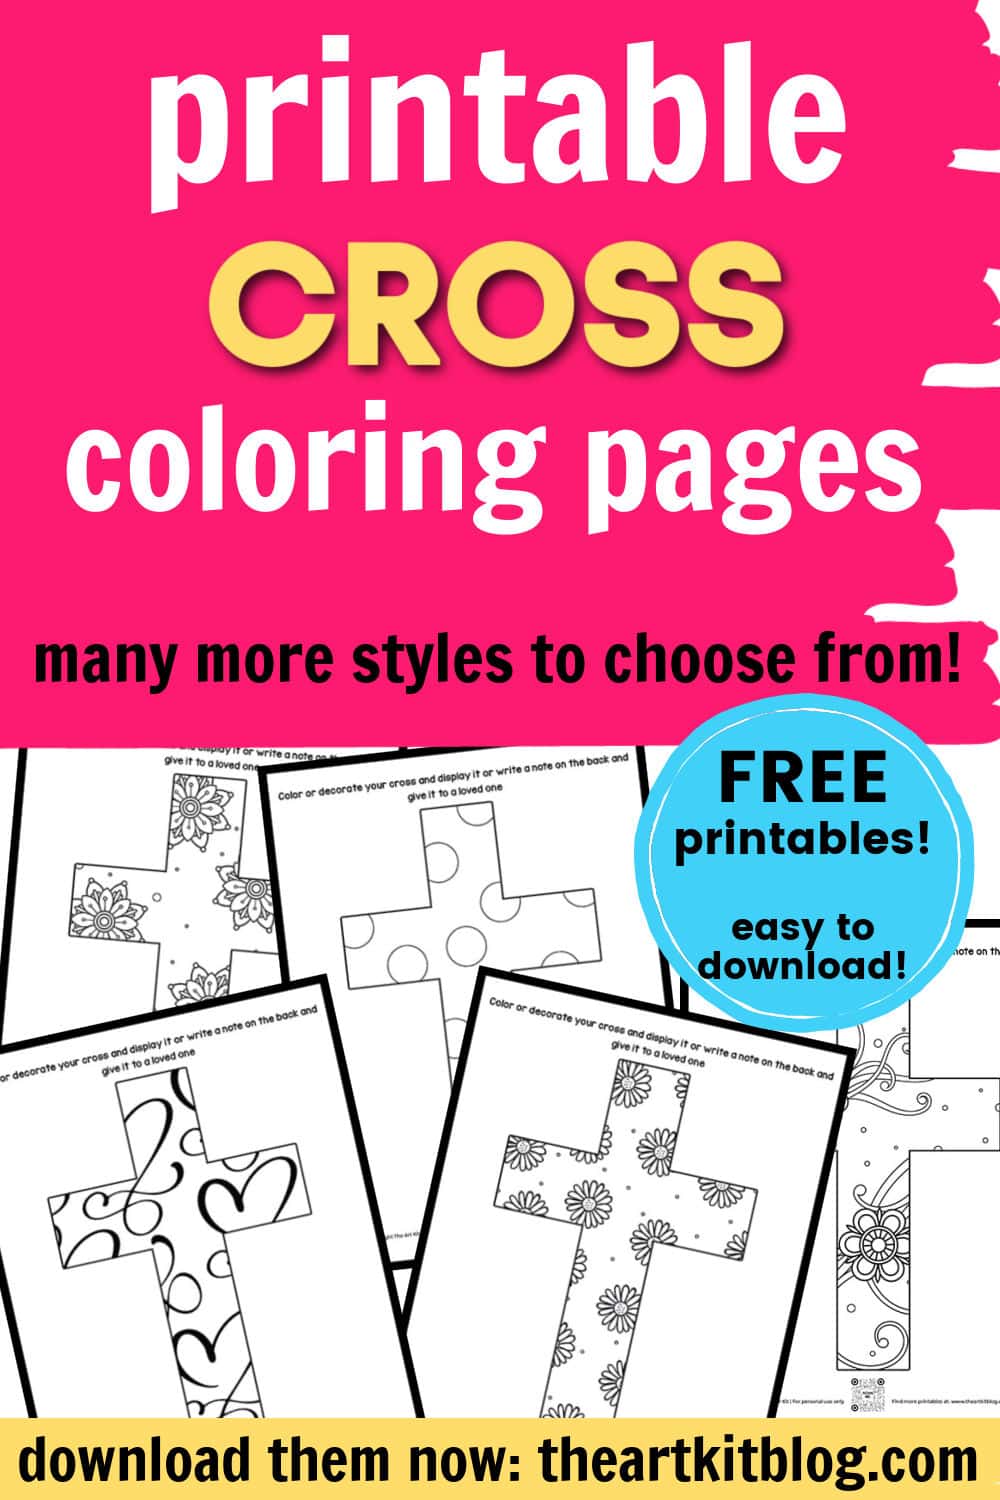 Beautiful free printable cross coloring pages â the art kit